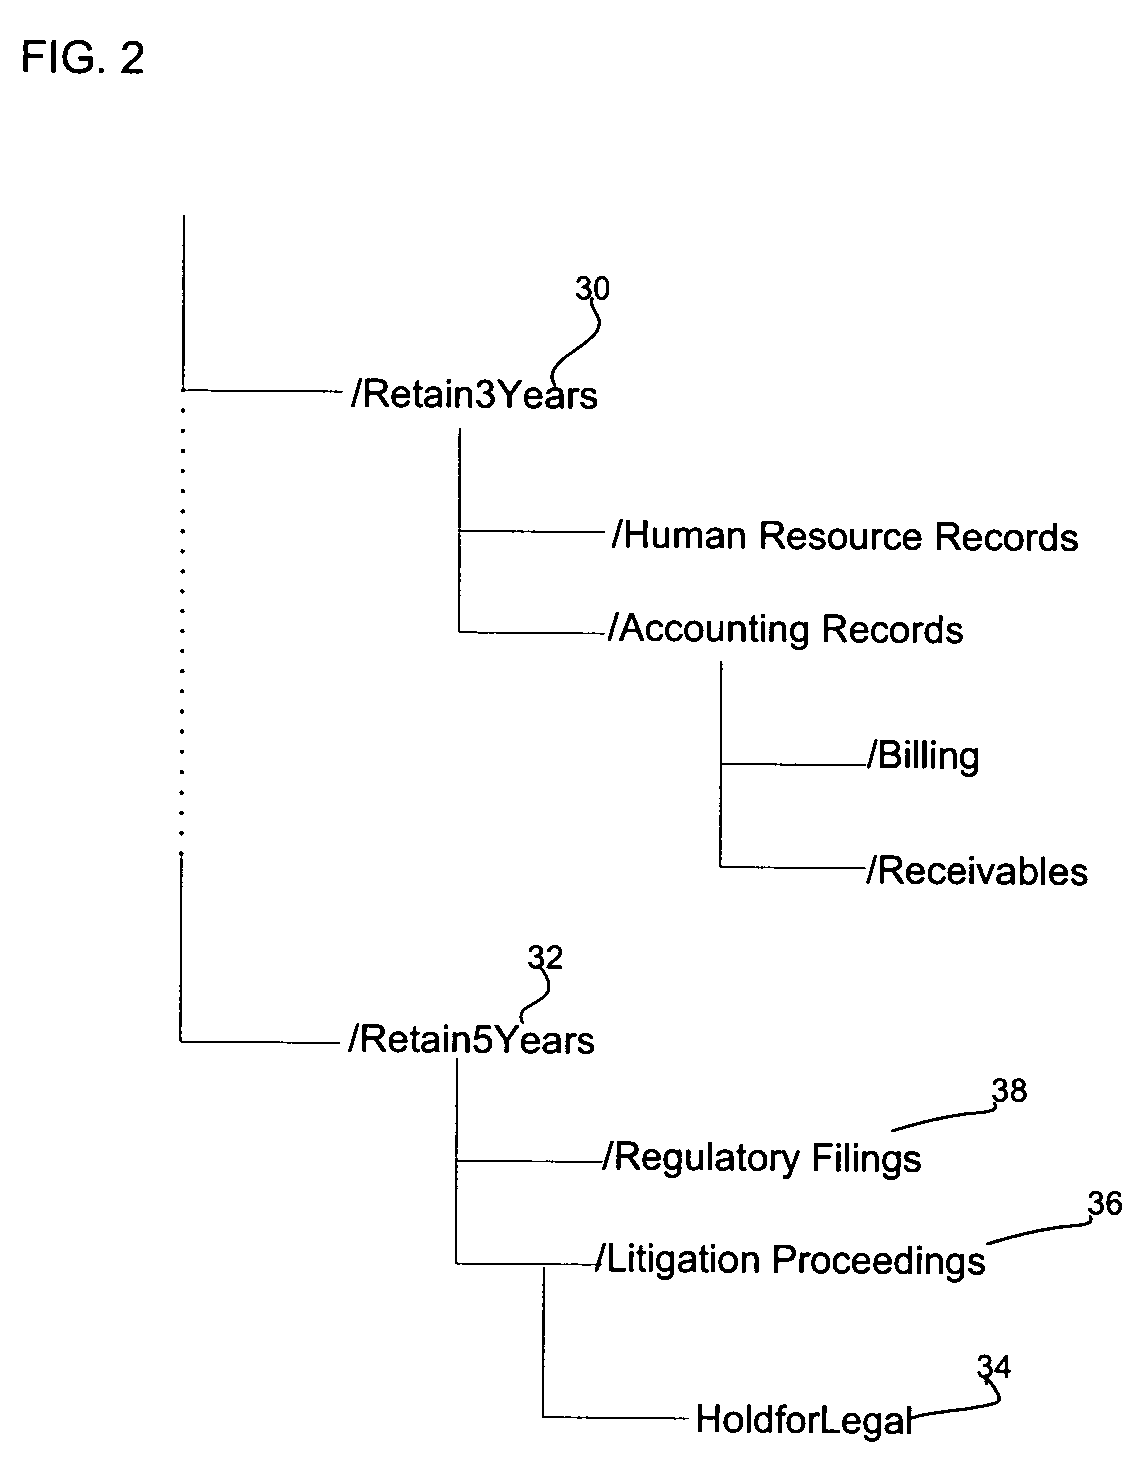 Method, system, and program for archiving files